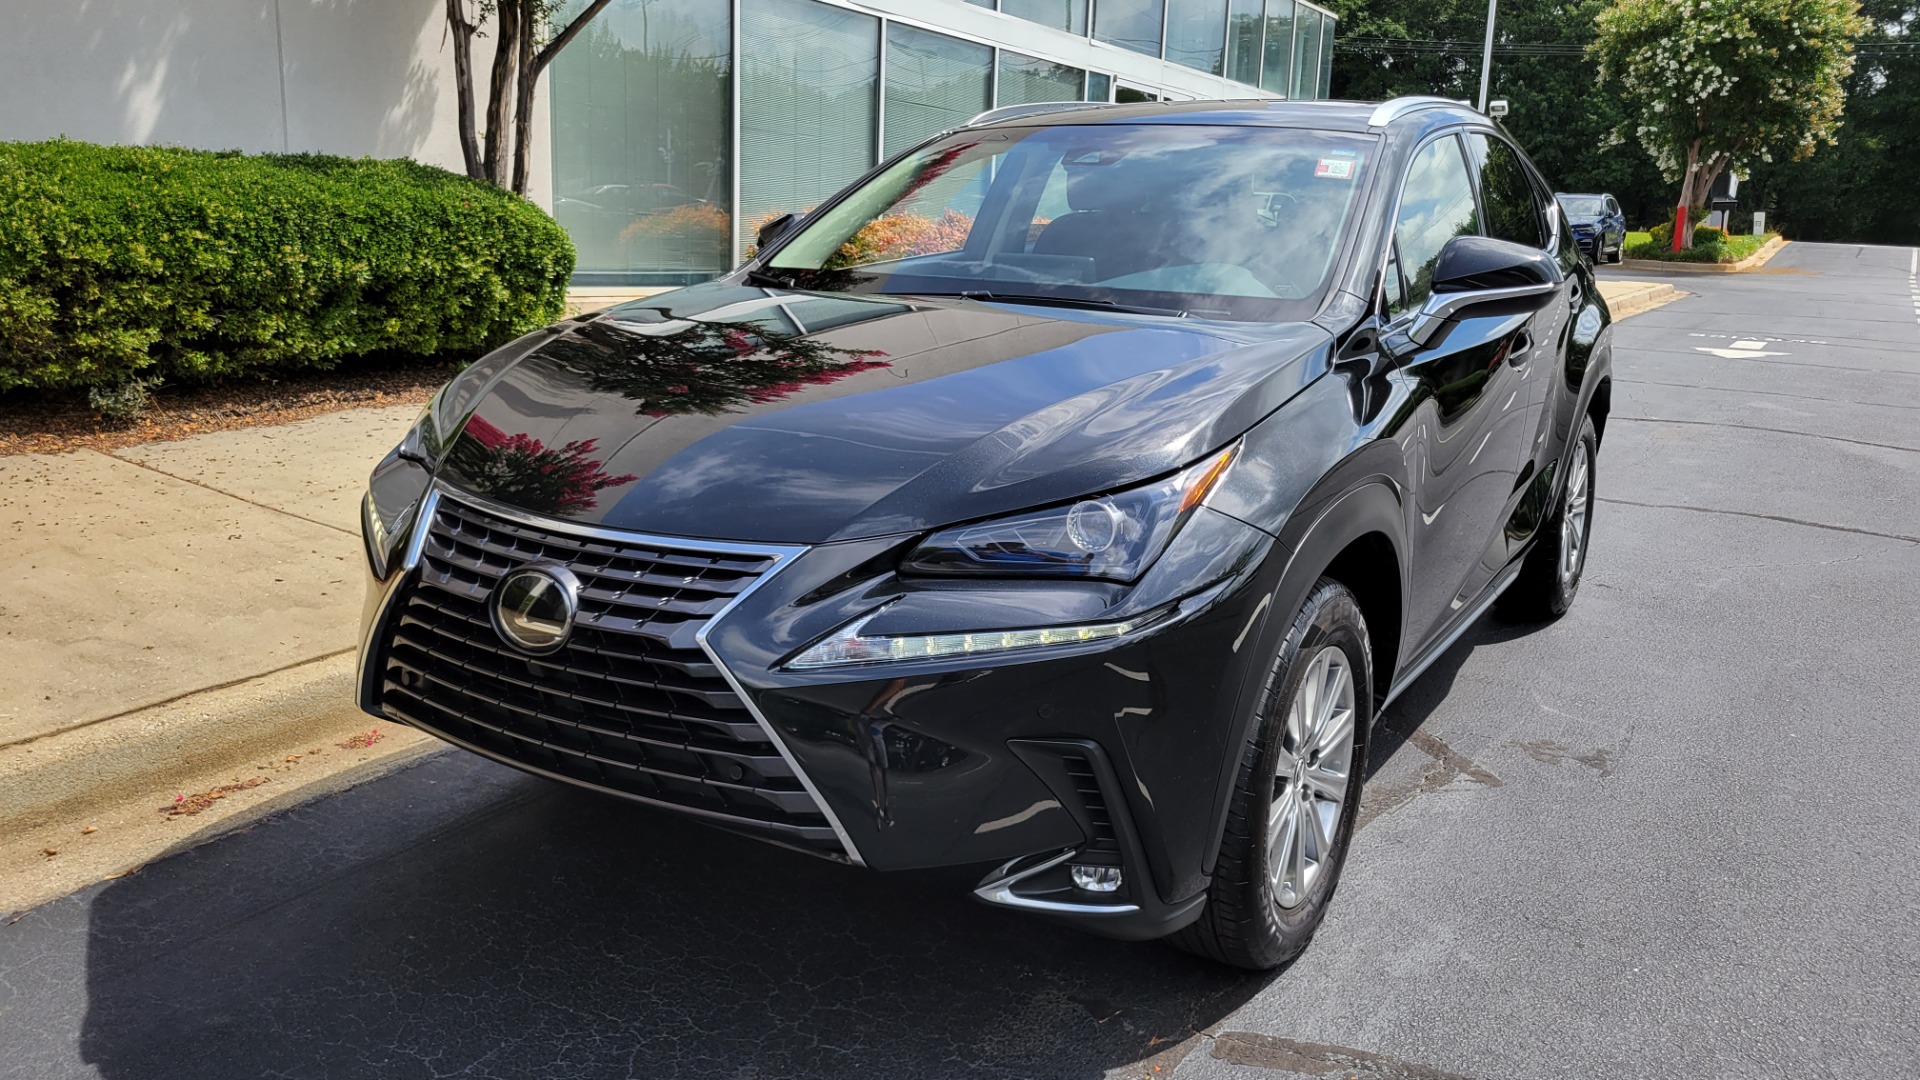 Used 2019 Lexus NX 300 / 2.0L TURBO / AUTO / SUNROOF / VENTILATED SEATS / CAMERA for sale Sold at Formula Imports in Charlotte NC 28227 2